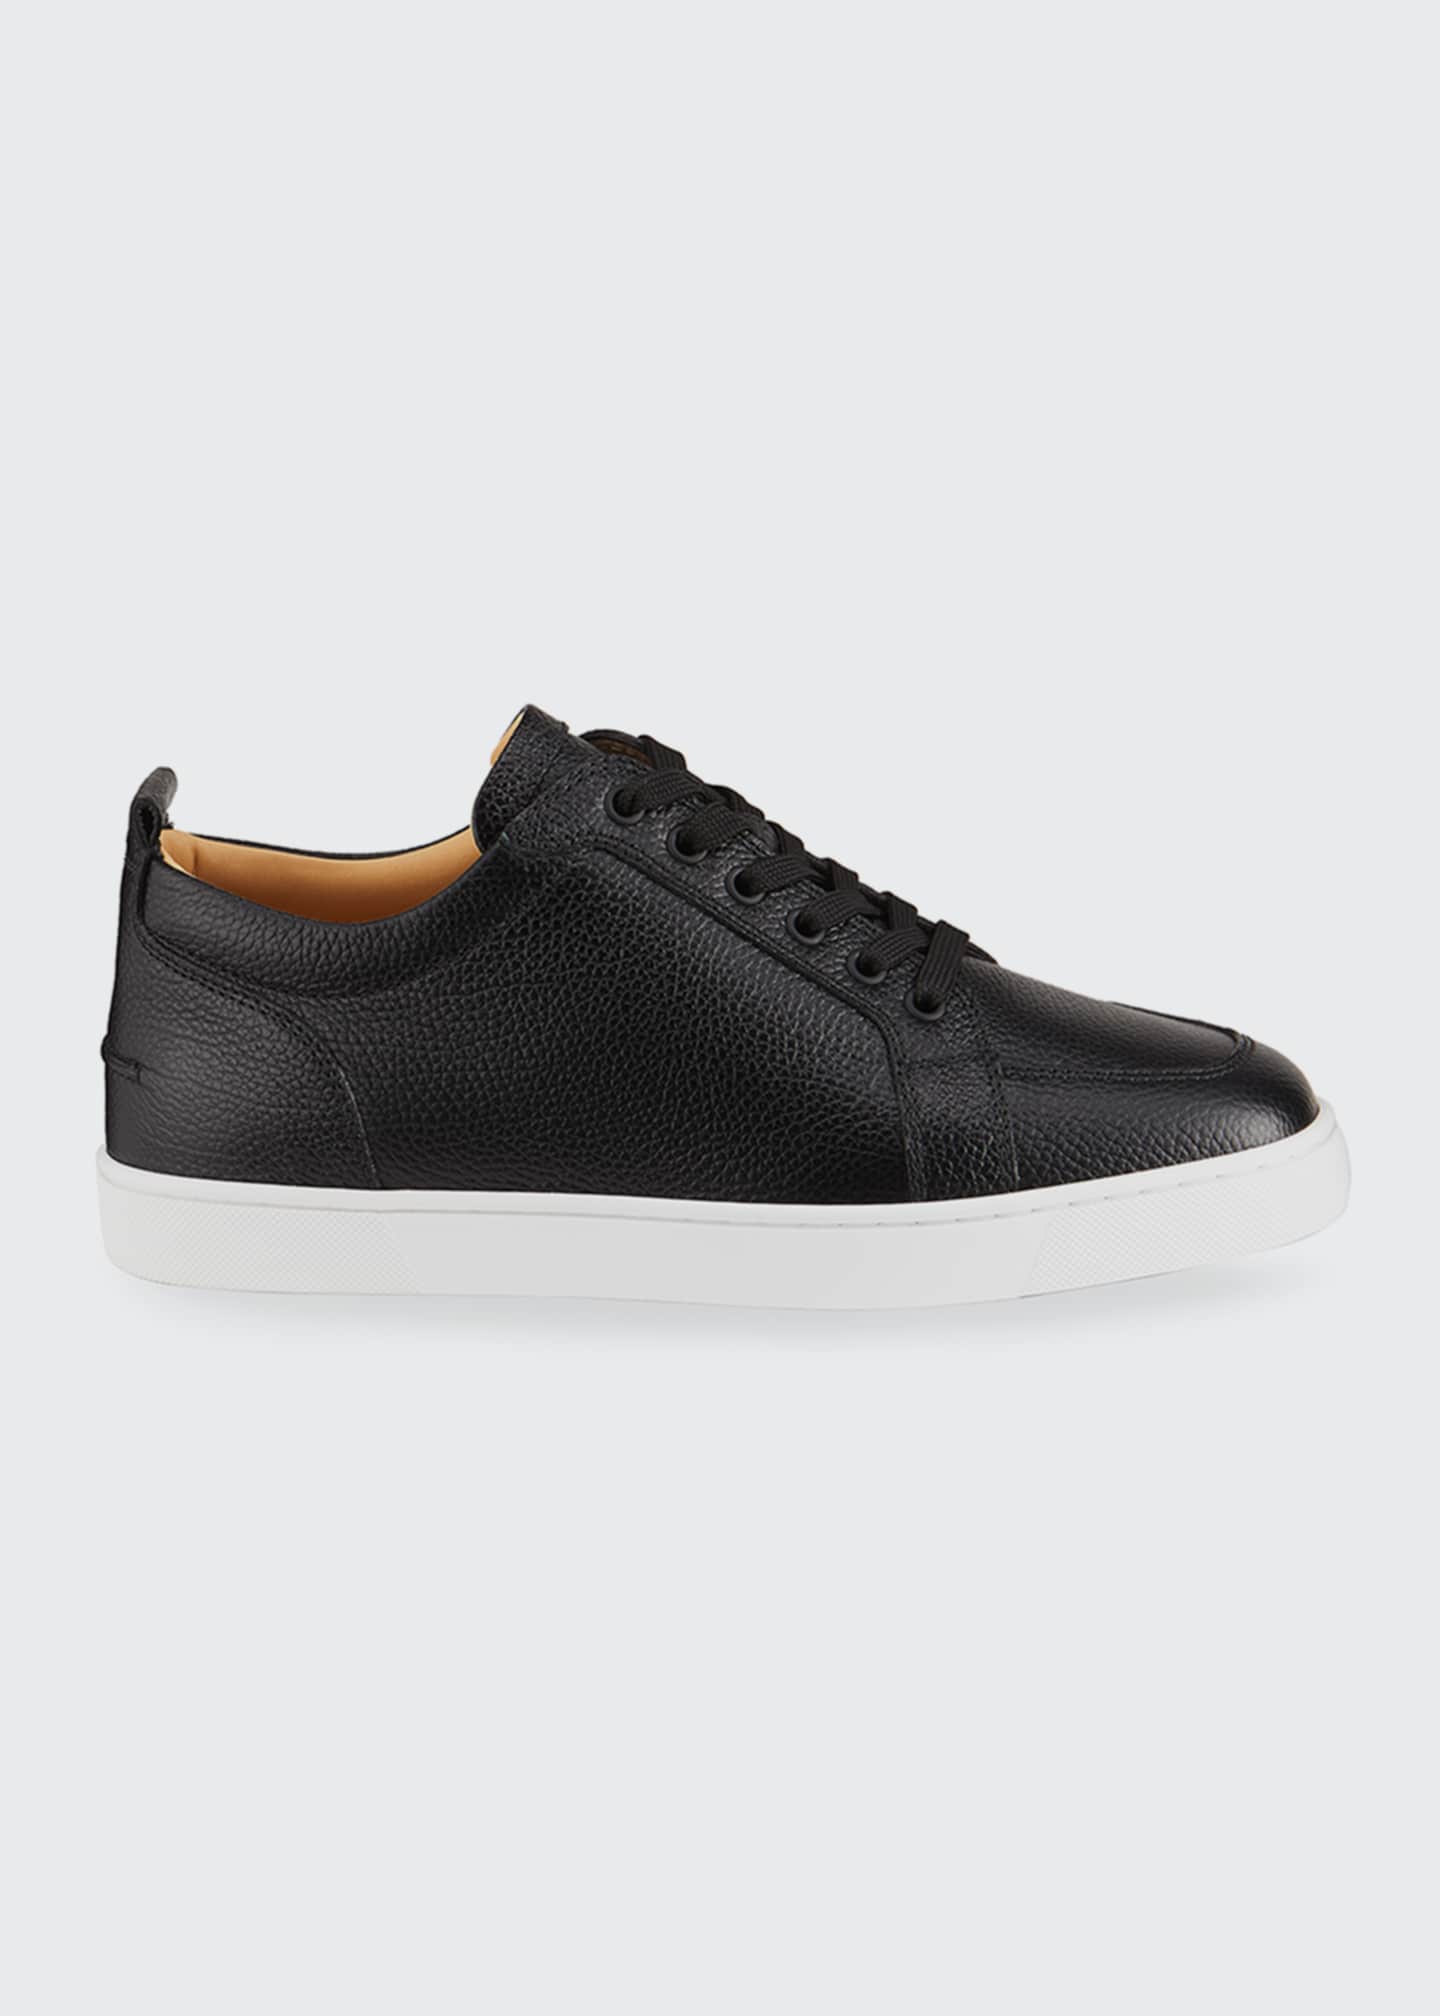 rantulow flat leather sneakers